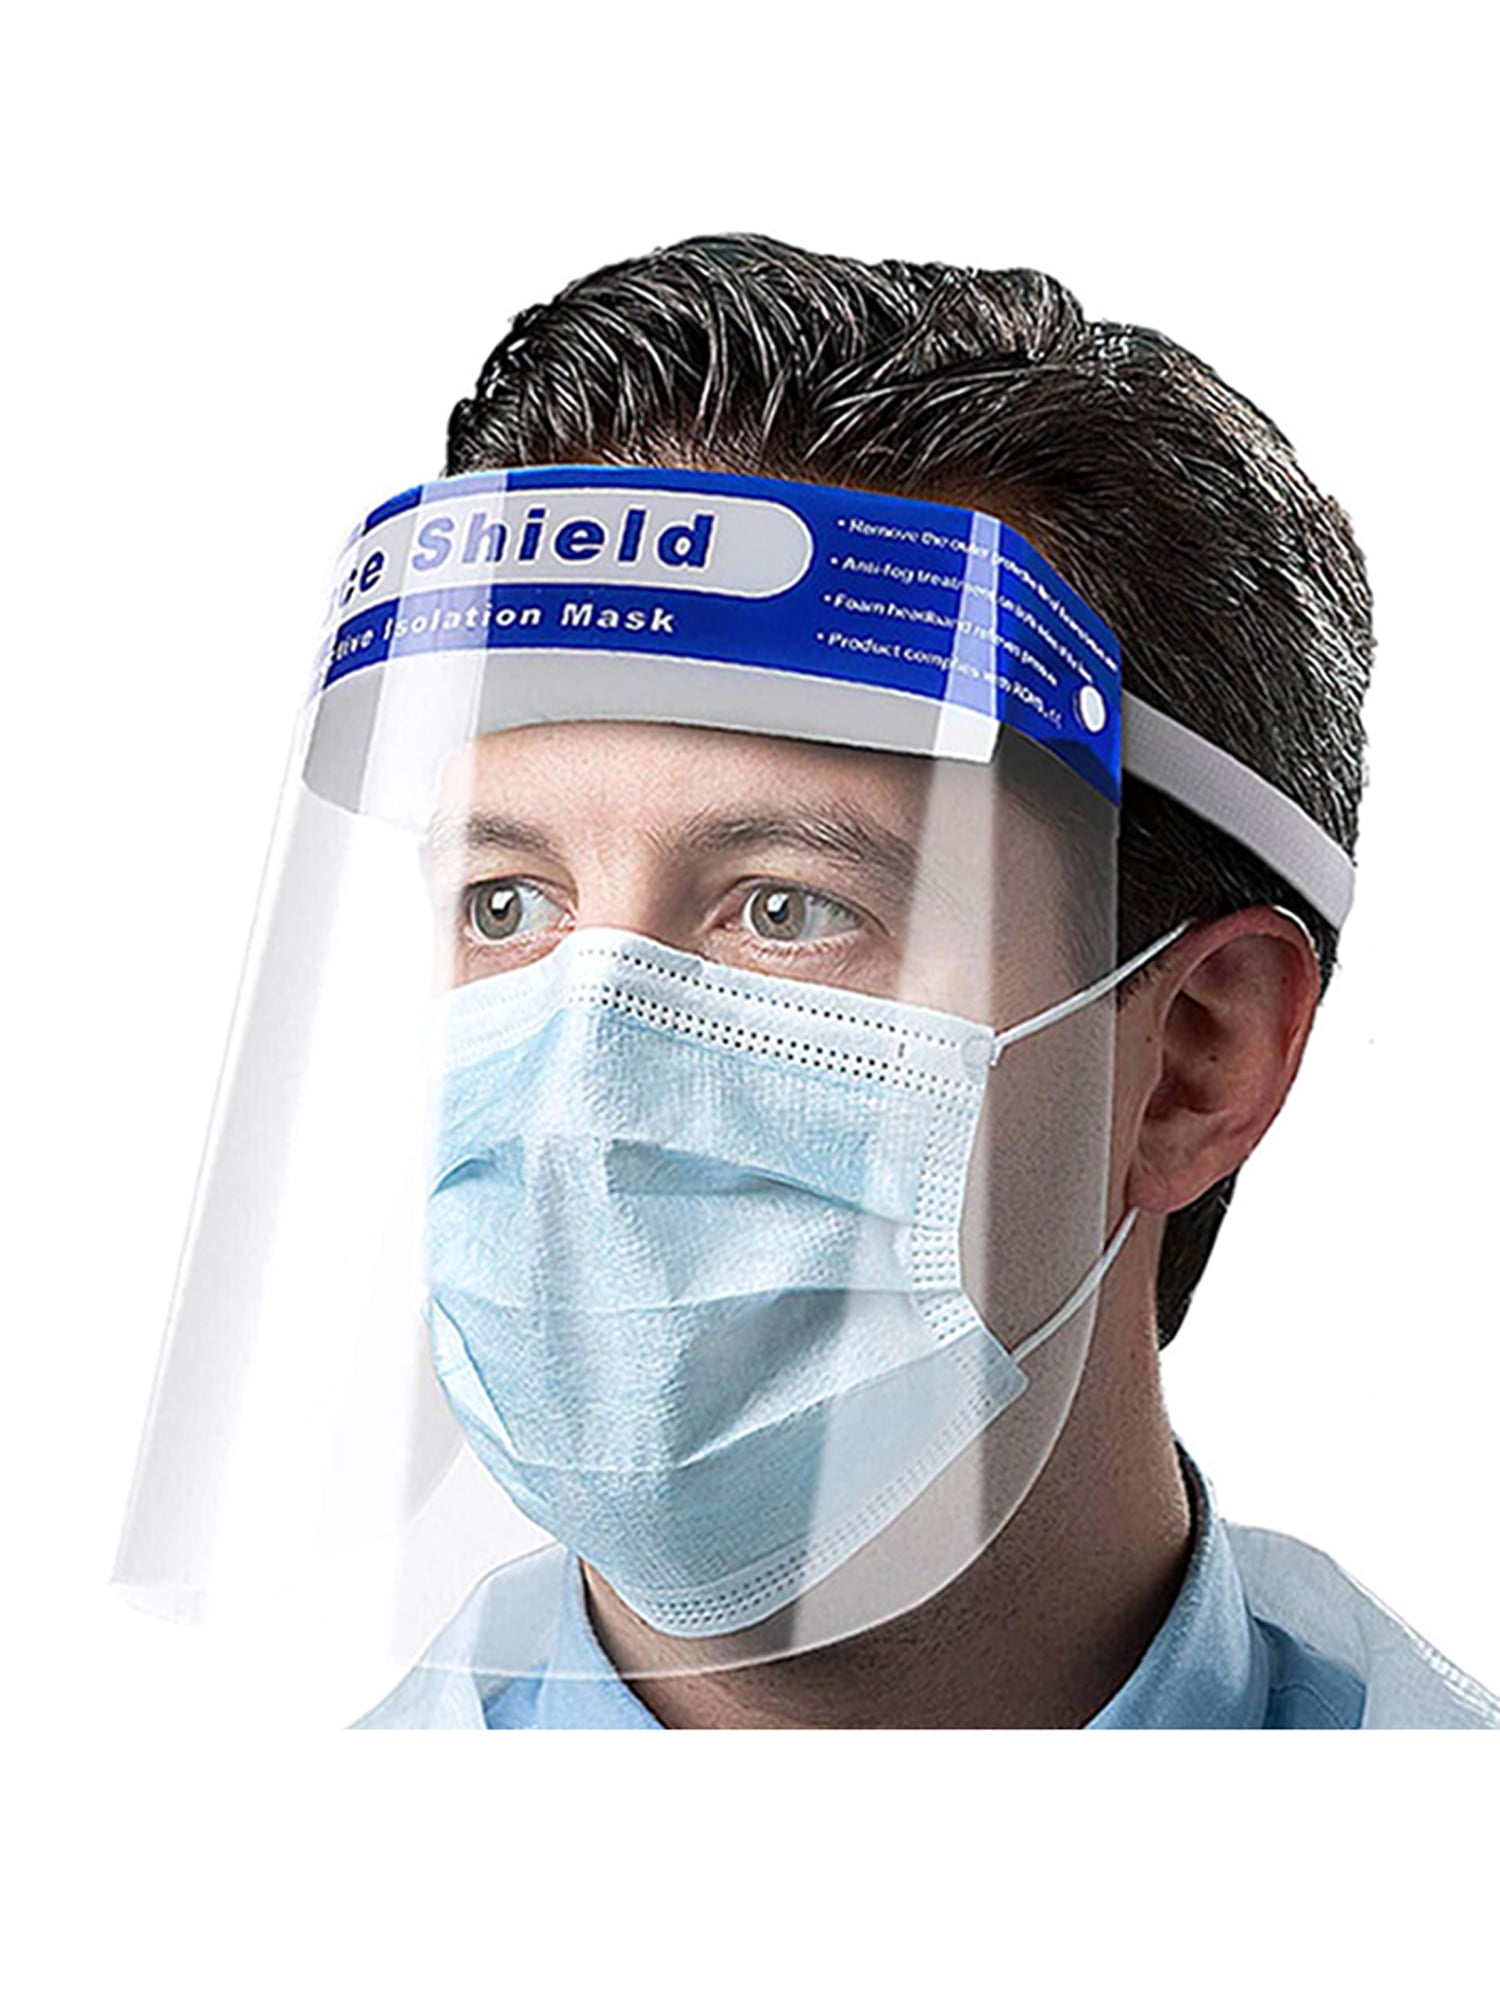 Details about   1pcs Face Cover Mouth Shield Visor Adjustable Anti-Fog Anti-SalivaBSUS 